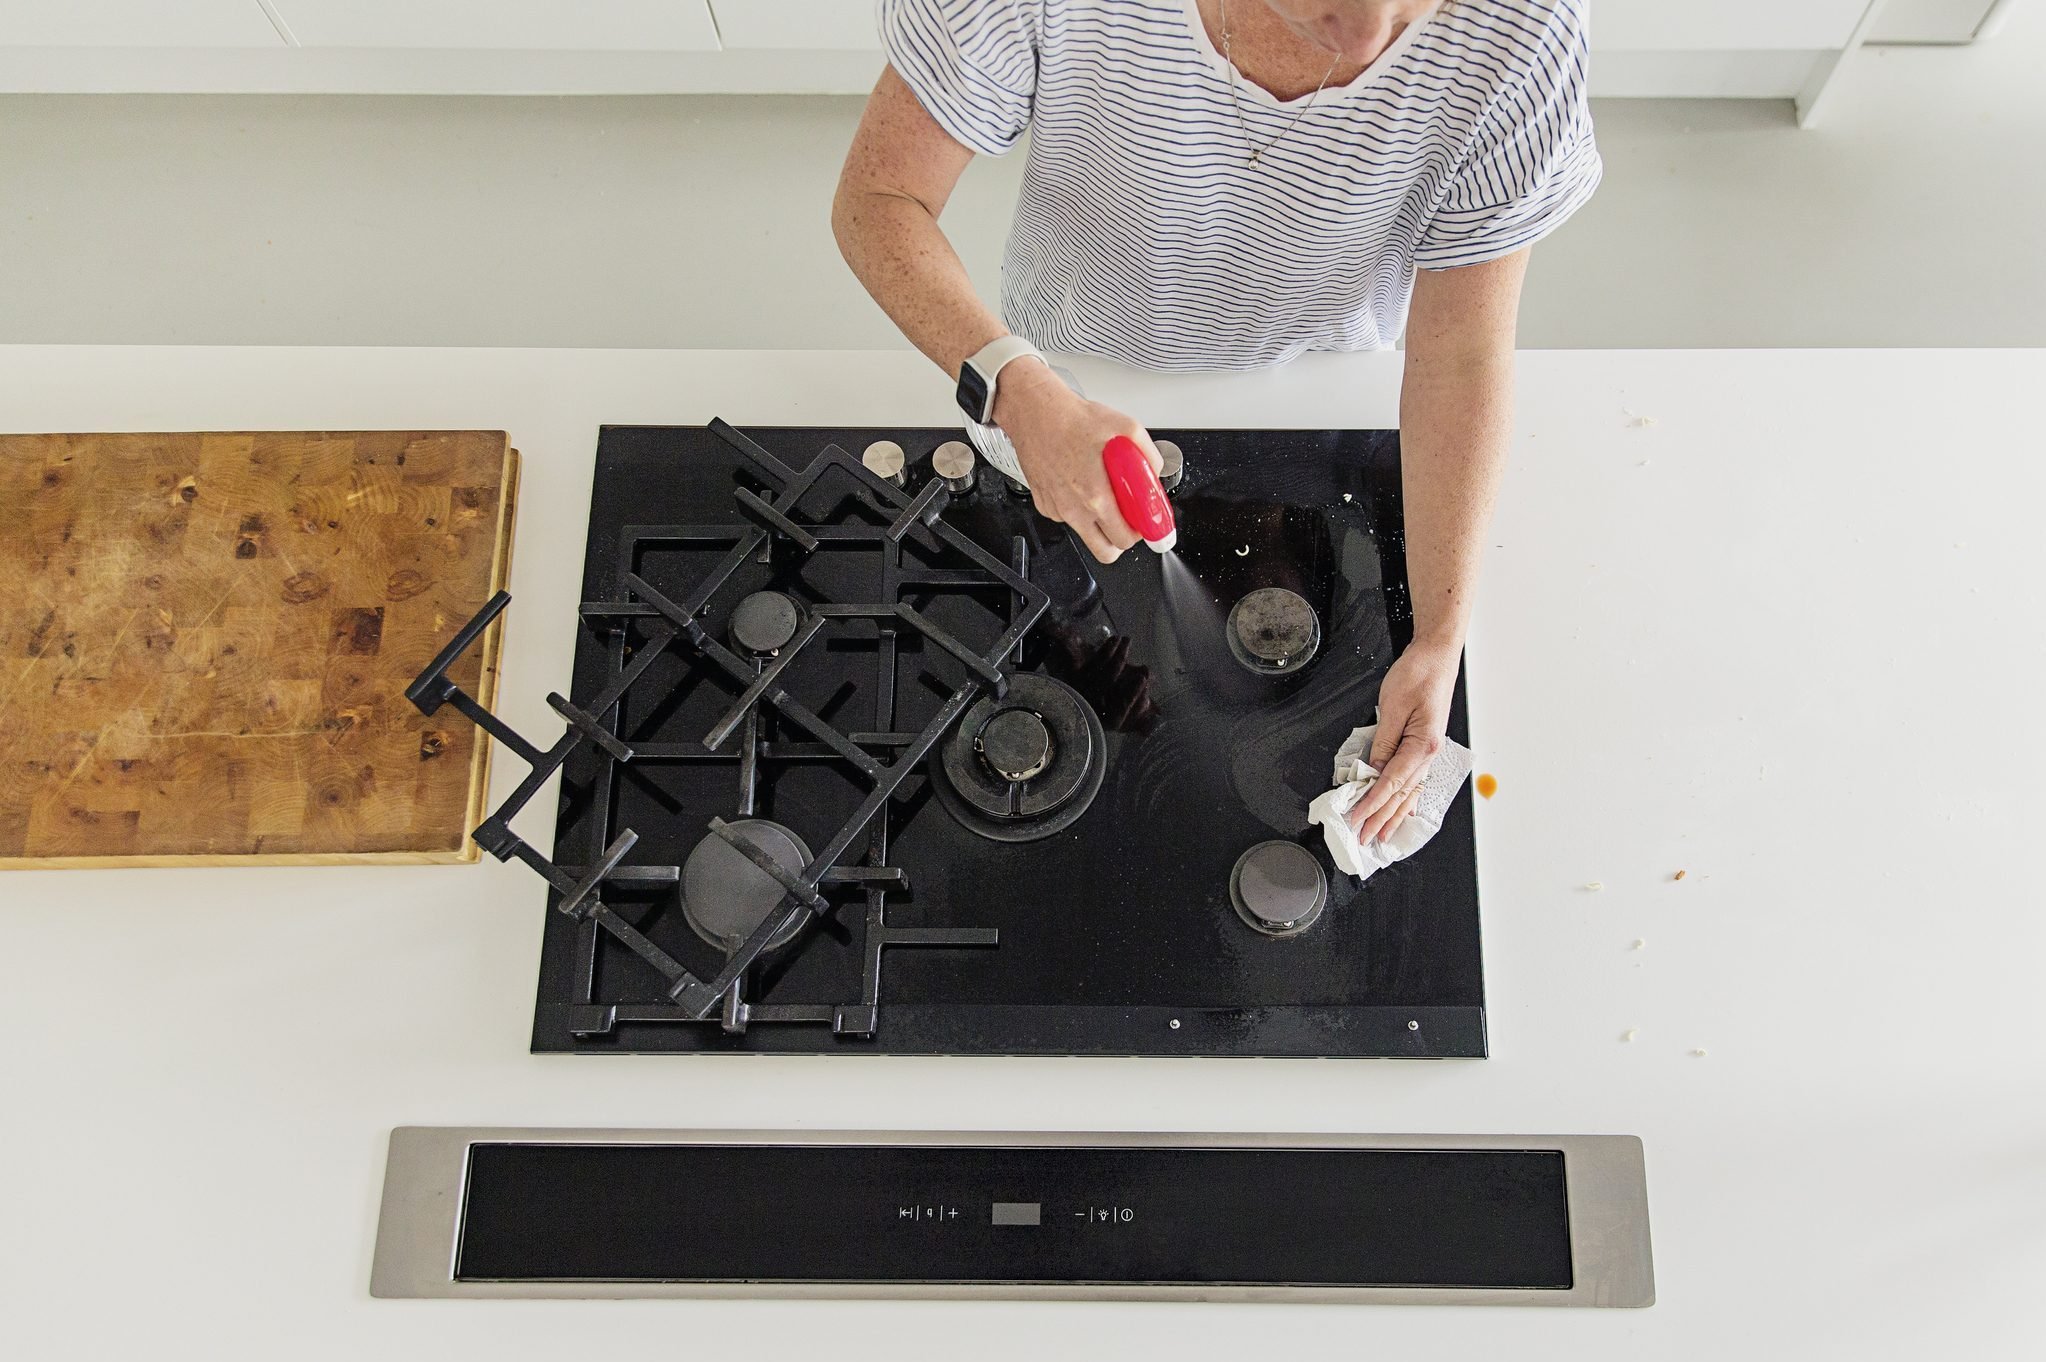 Tips You Need When Cooking With An Electric Stove